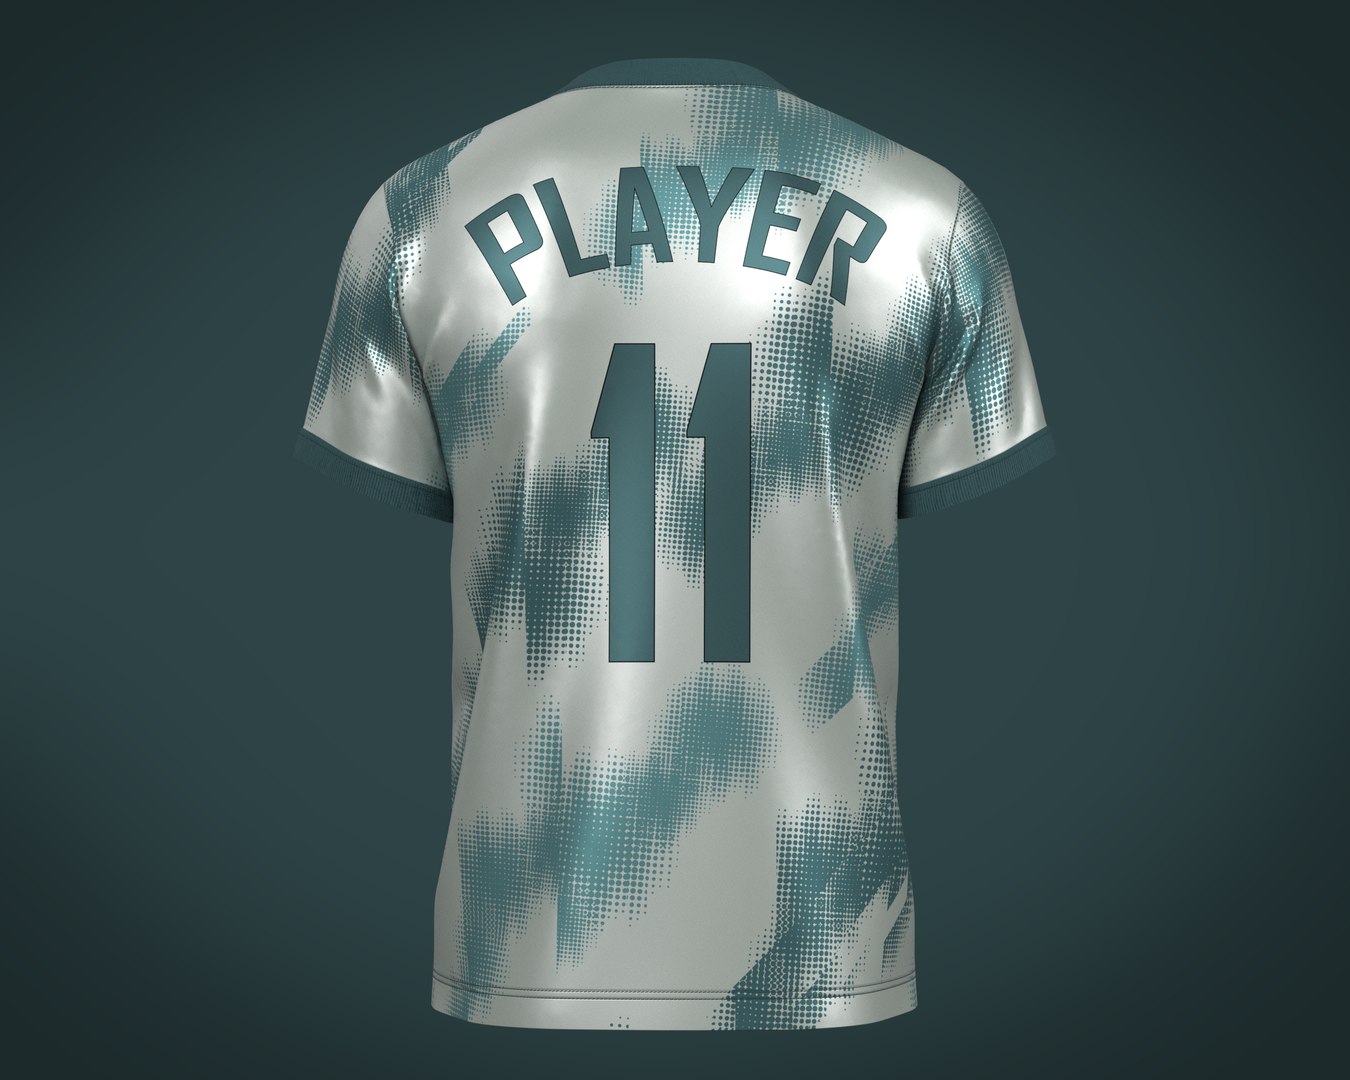 Soccer Football Blue and White Jersey Player-11 model - TurboSquid